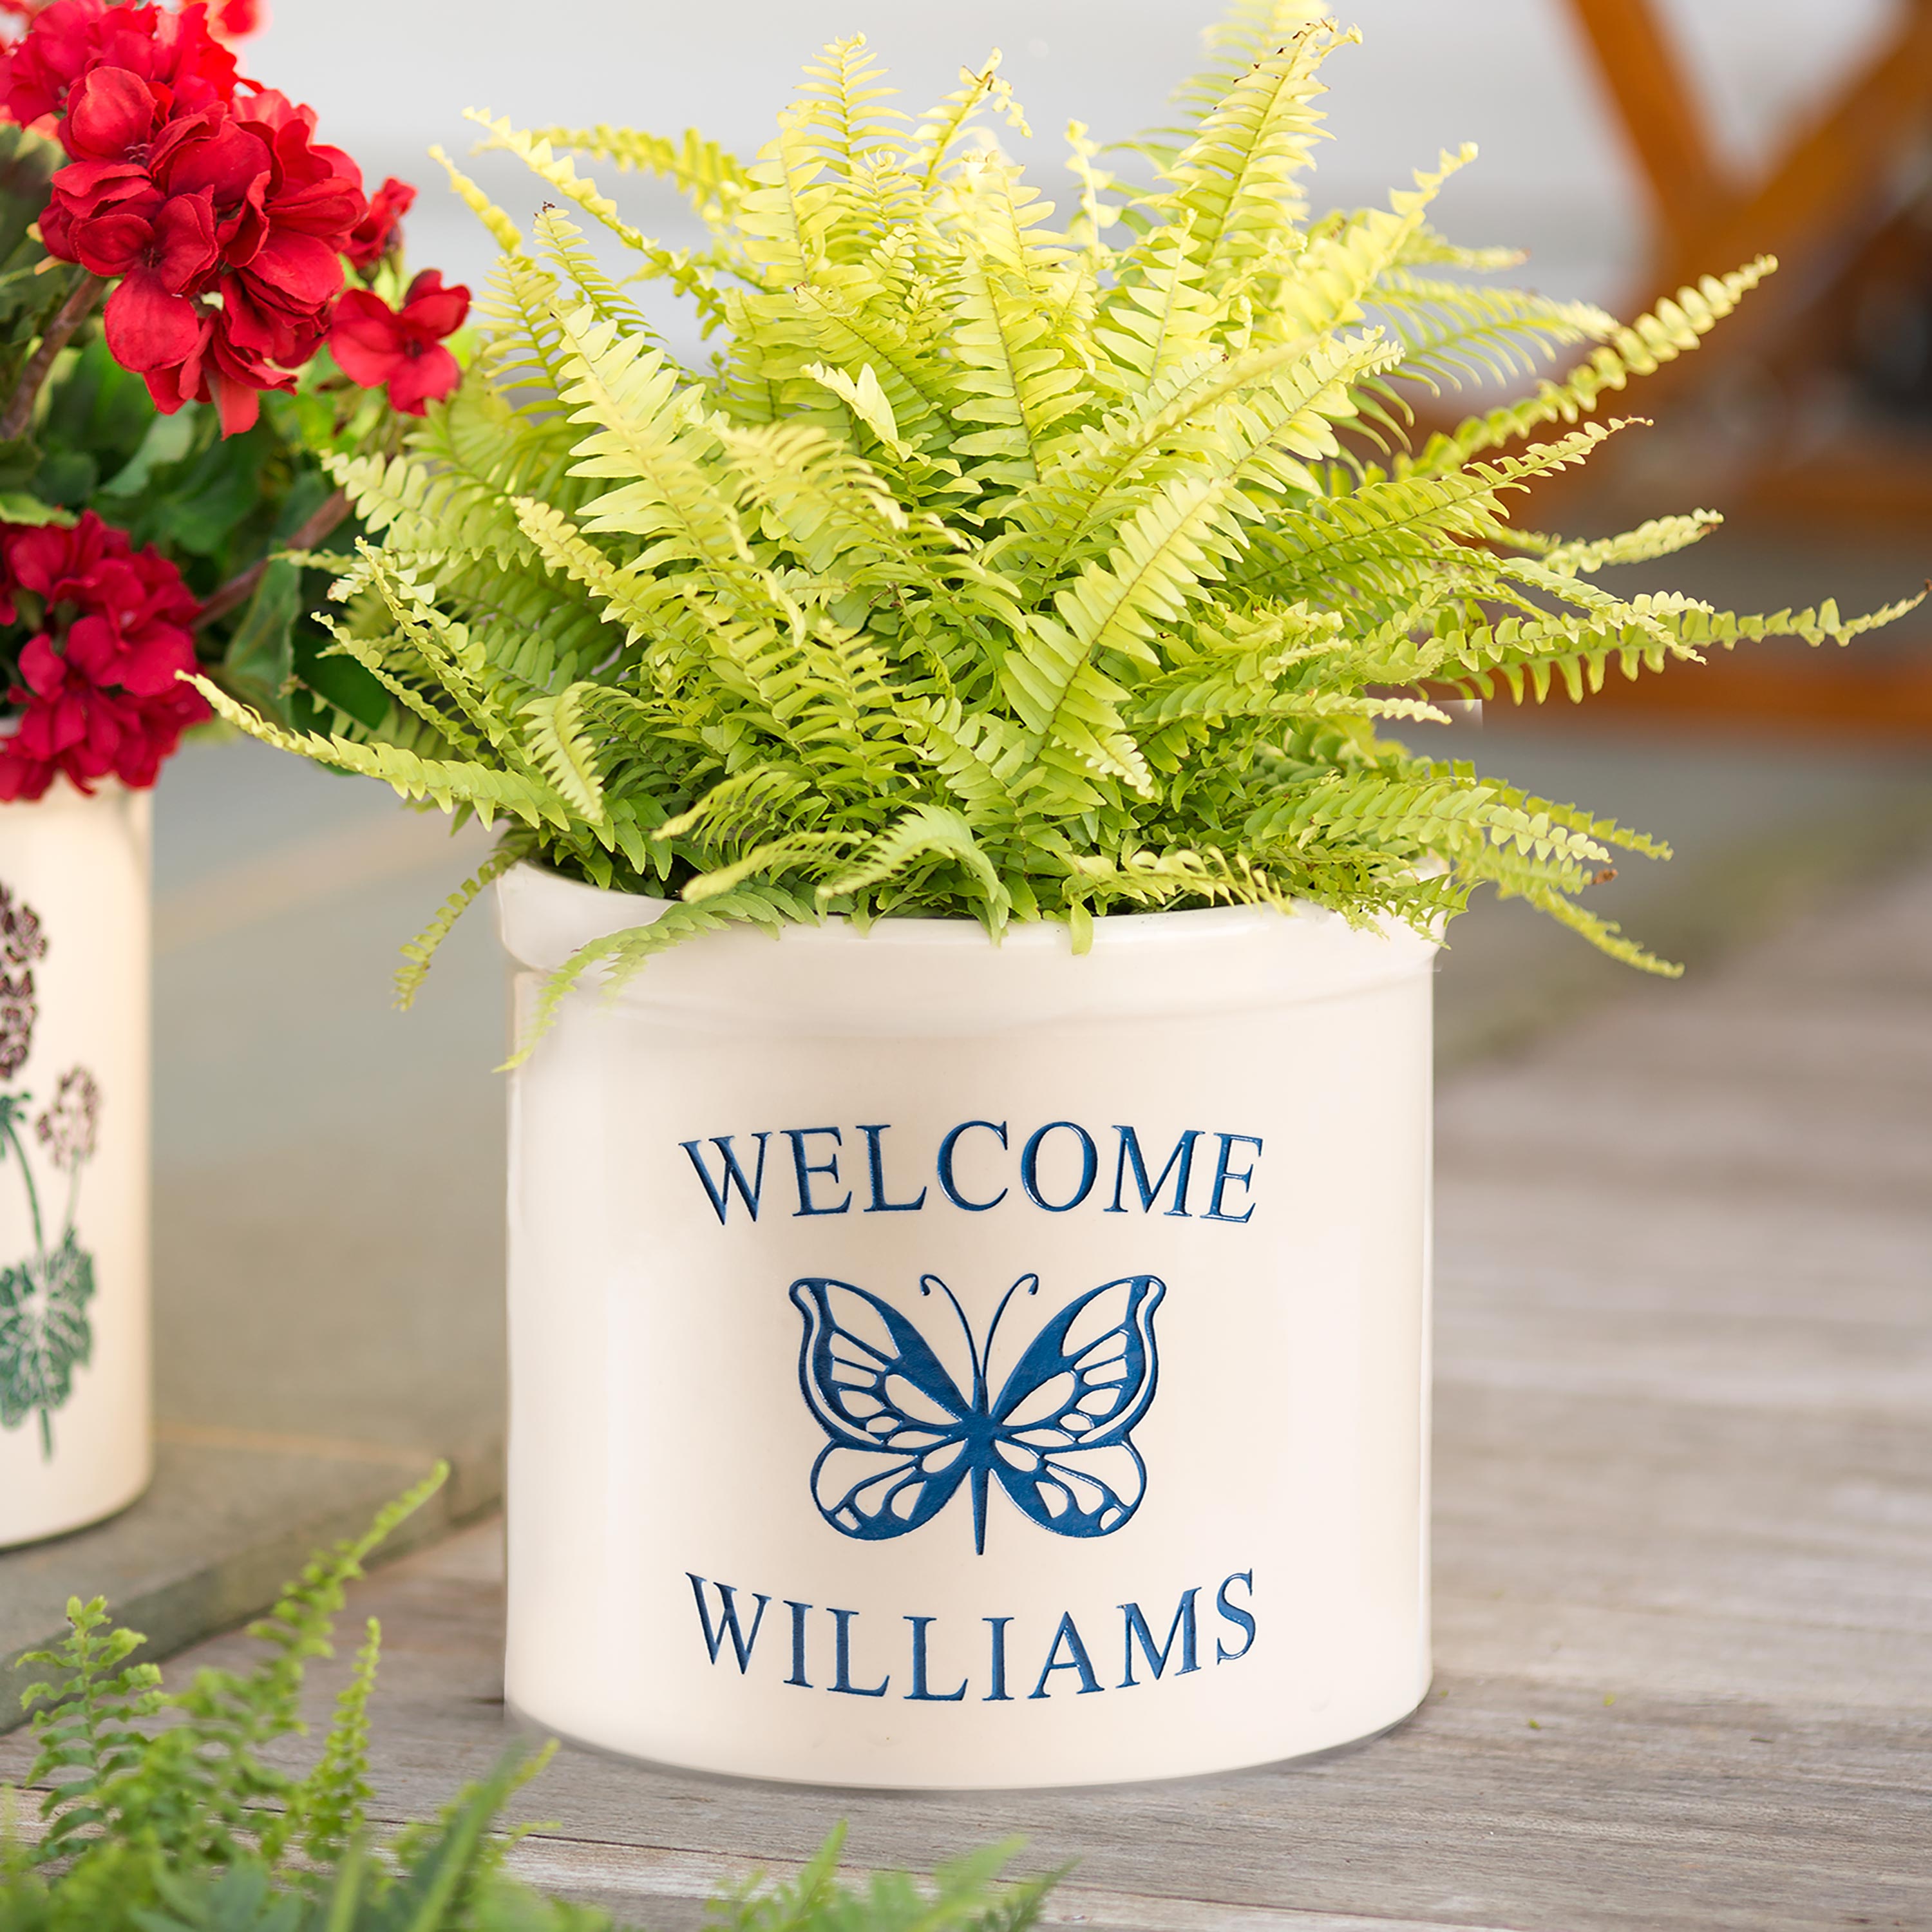 Personalized Stoneware Welcome Crock with Butterfly